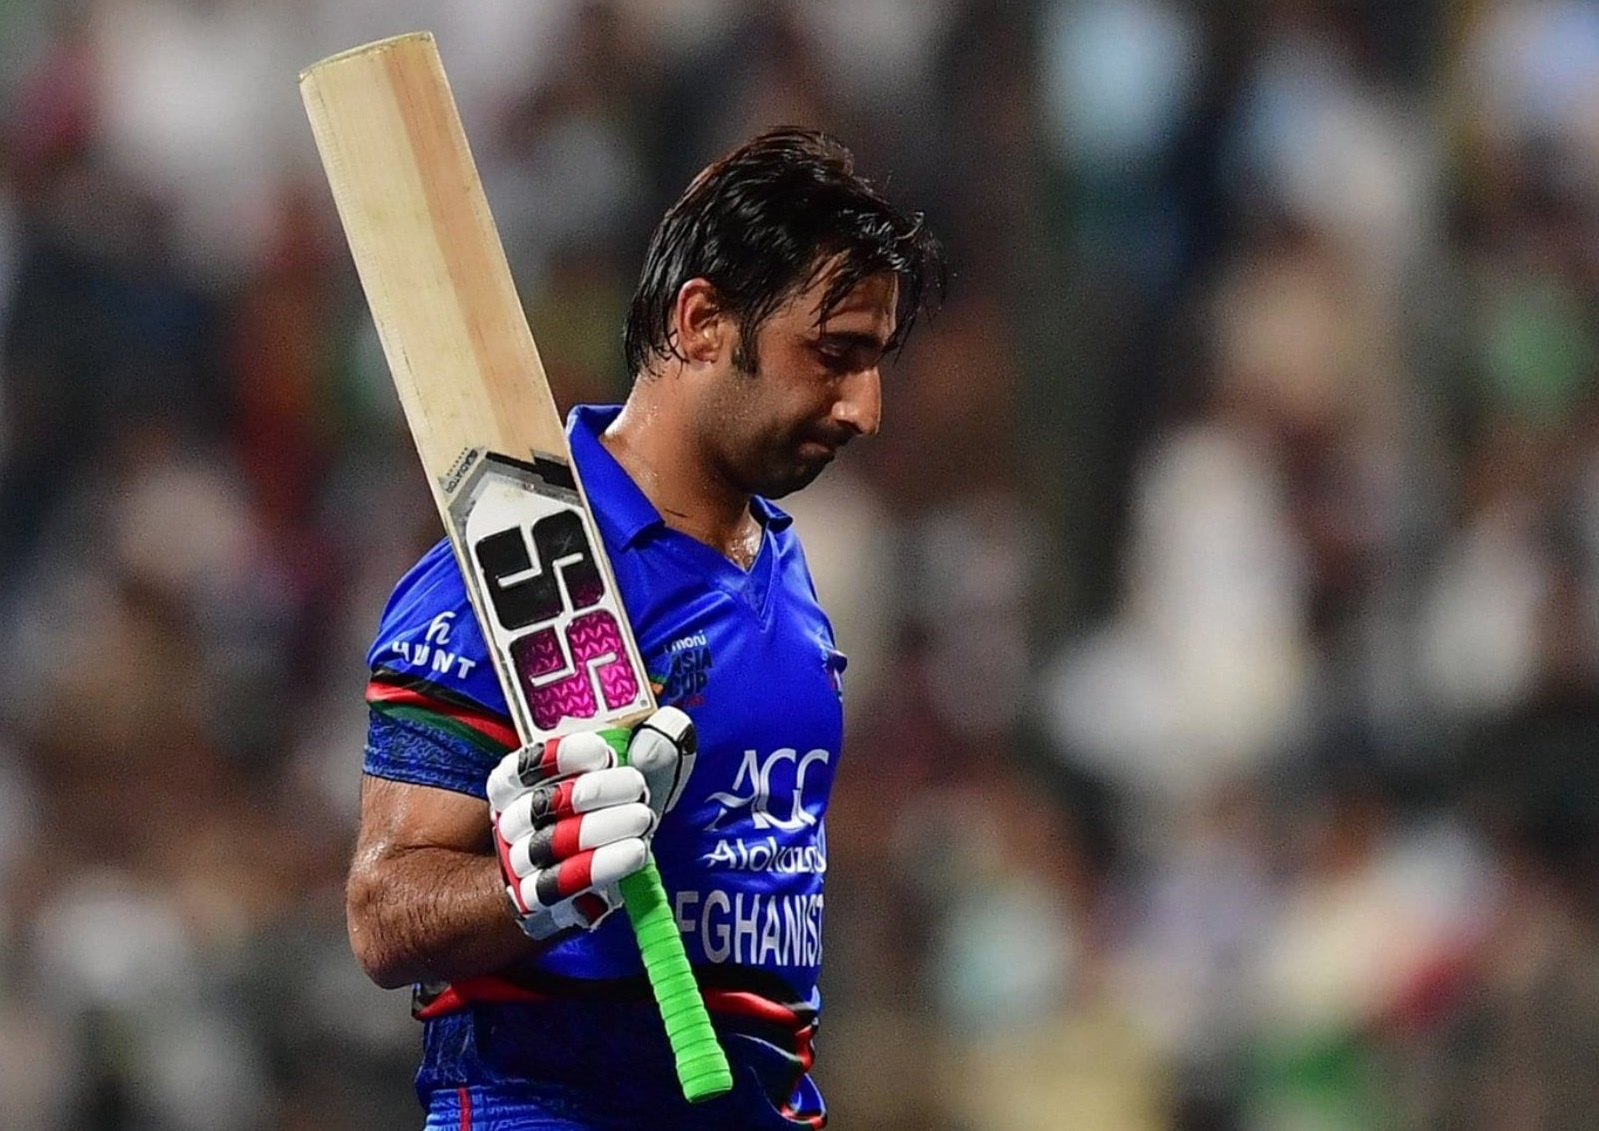 T20 World Cup 2021 | ‘I want to give chance to youngsters’ - Asghar Afghan on his decision to retire